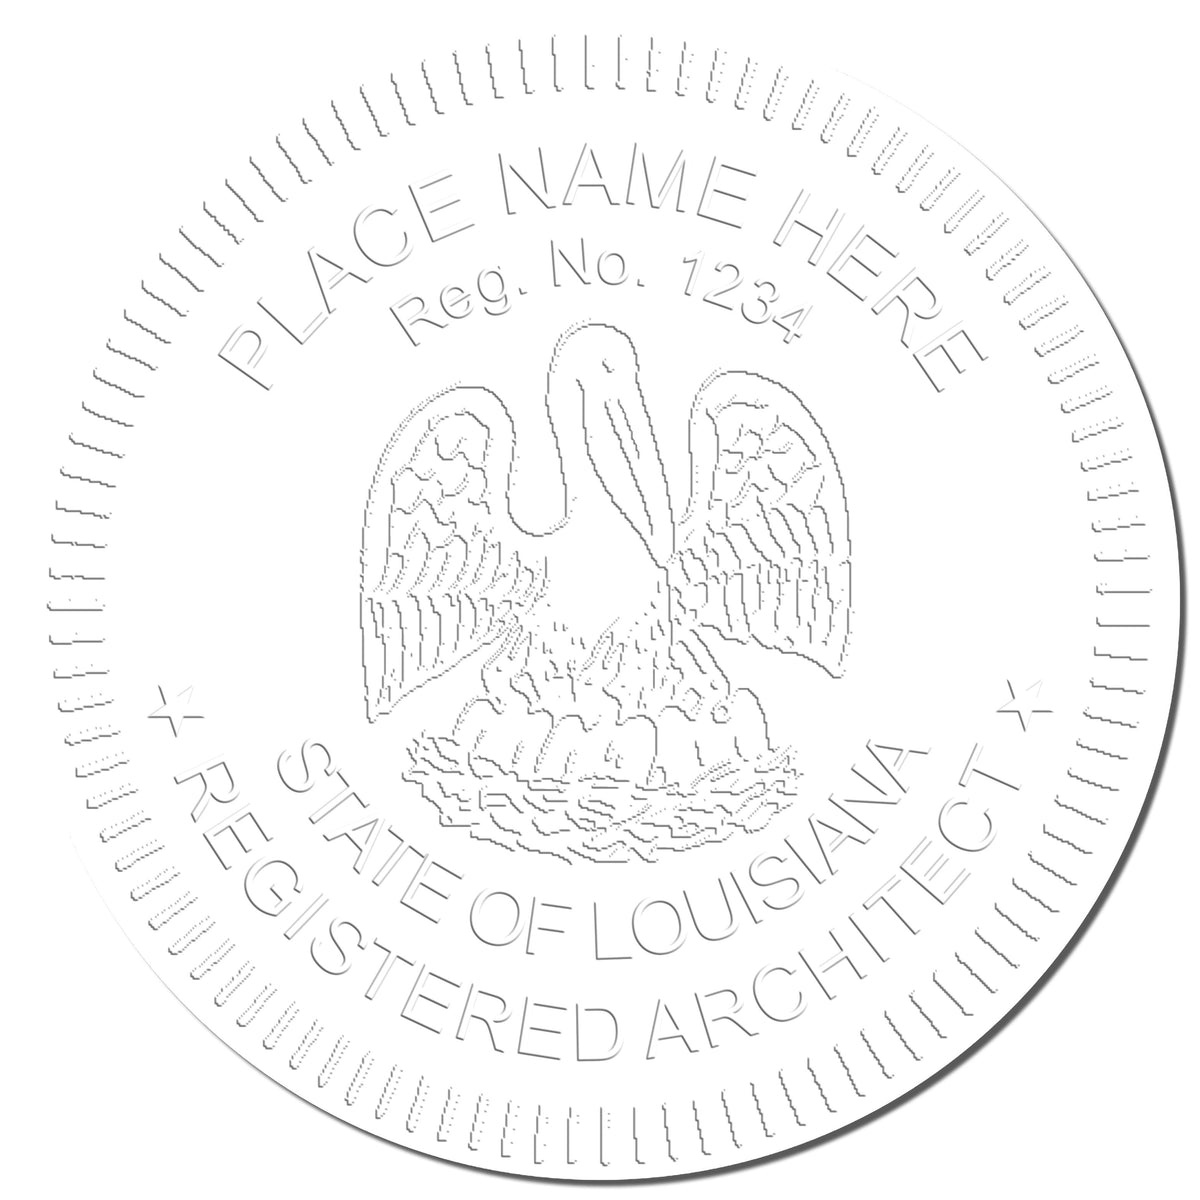 This paper is stamped with a sample imprint of the Gift Louisiana Architect Seal, signifying its quality and reliability.